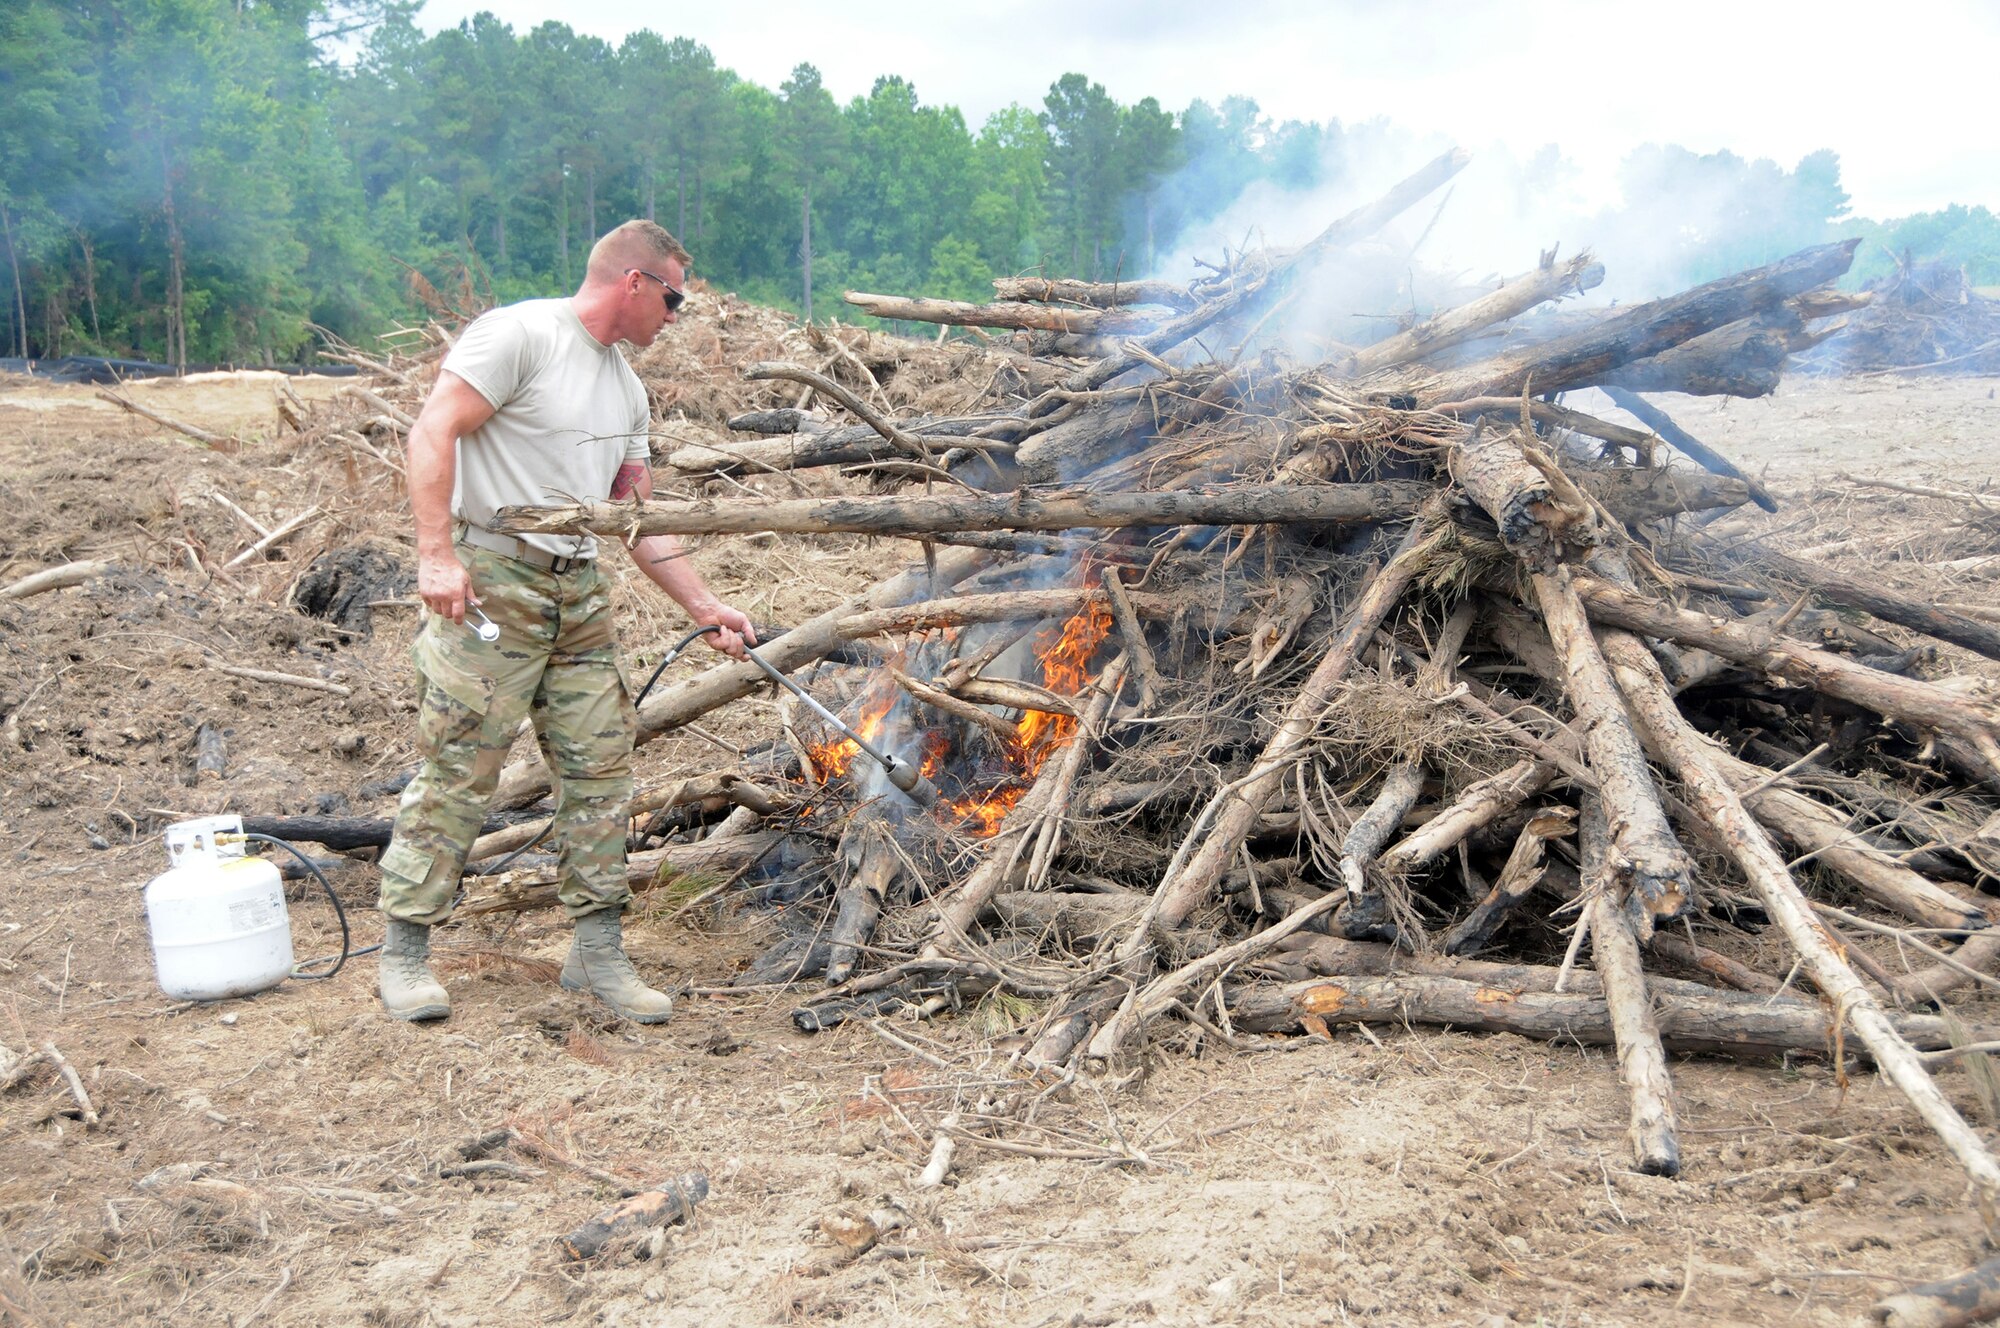 Tech. Sgt. Sean Sullivan, 445th Civil Engineer Squadron firefighter, burns brush cleared from a 40-acre area at Camp Kamasa, Crystal Springs, Mississippi, June 6, 2018.